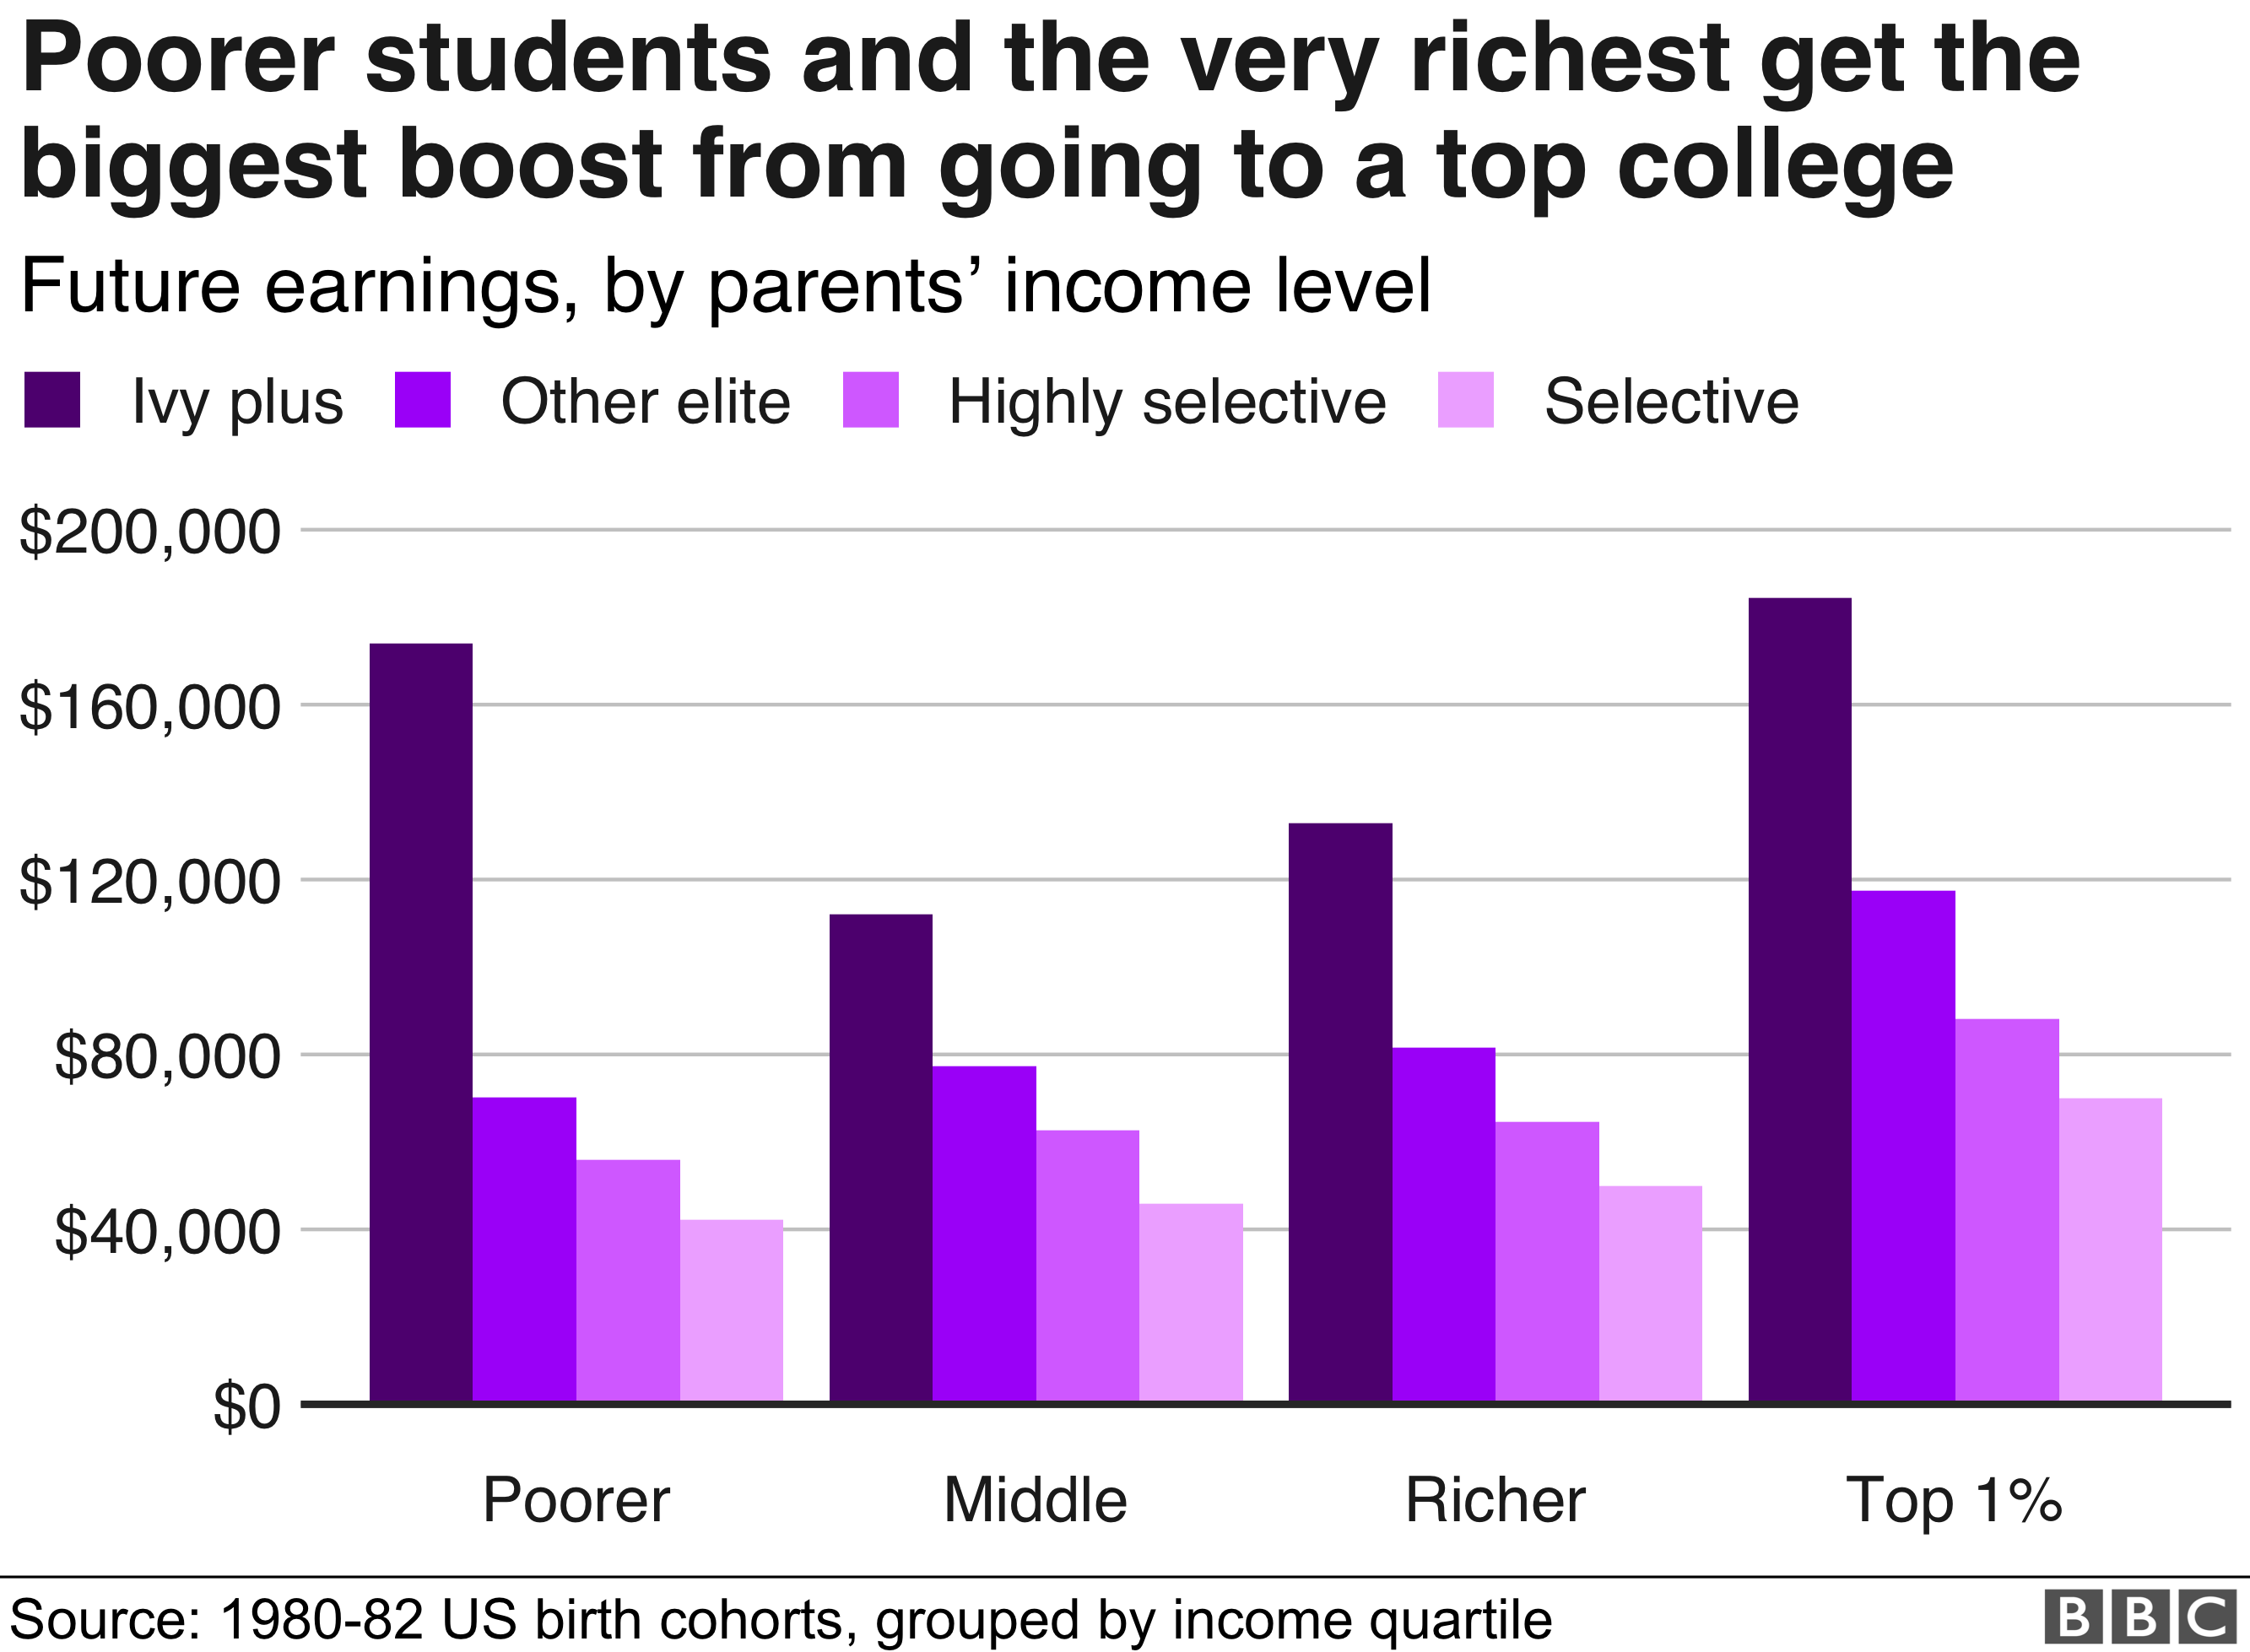 Earnings boost from going to a top college, by parents' income